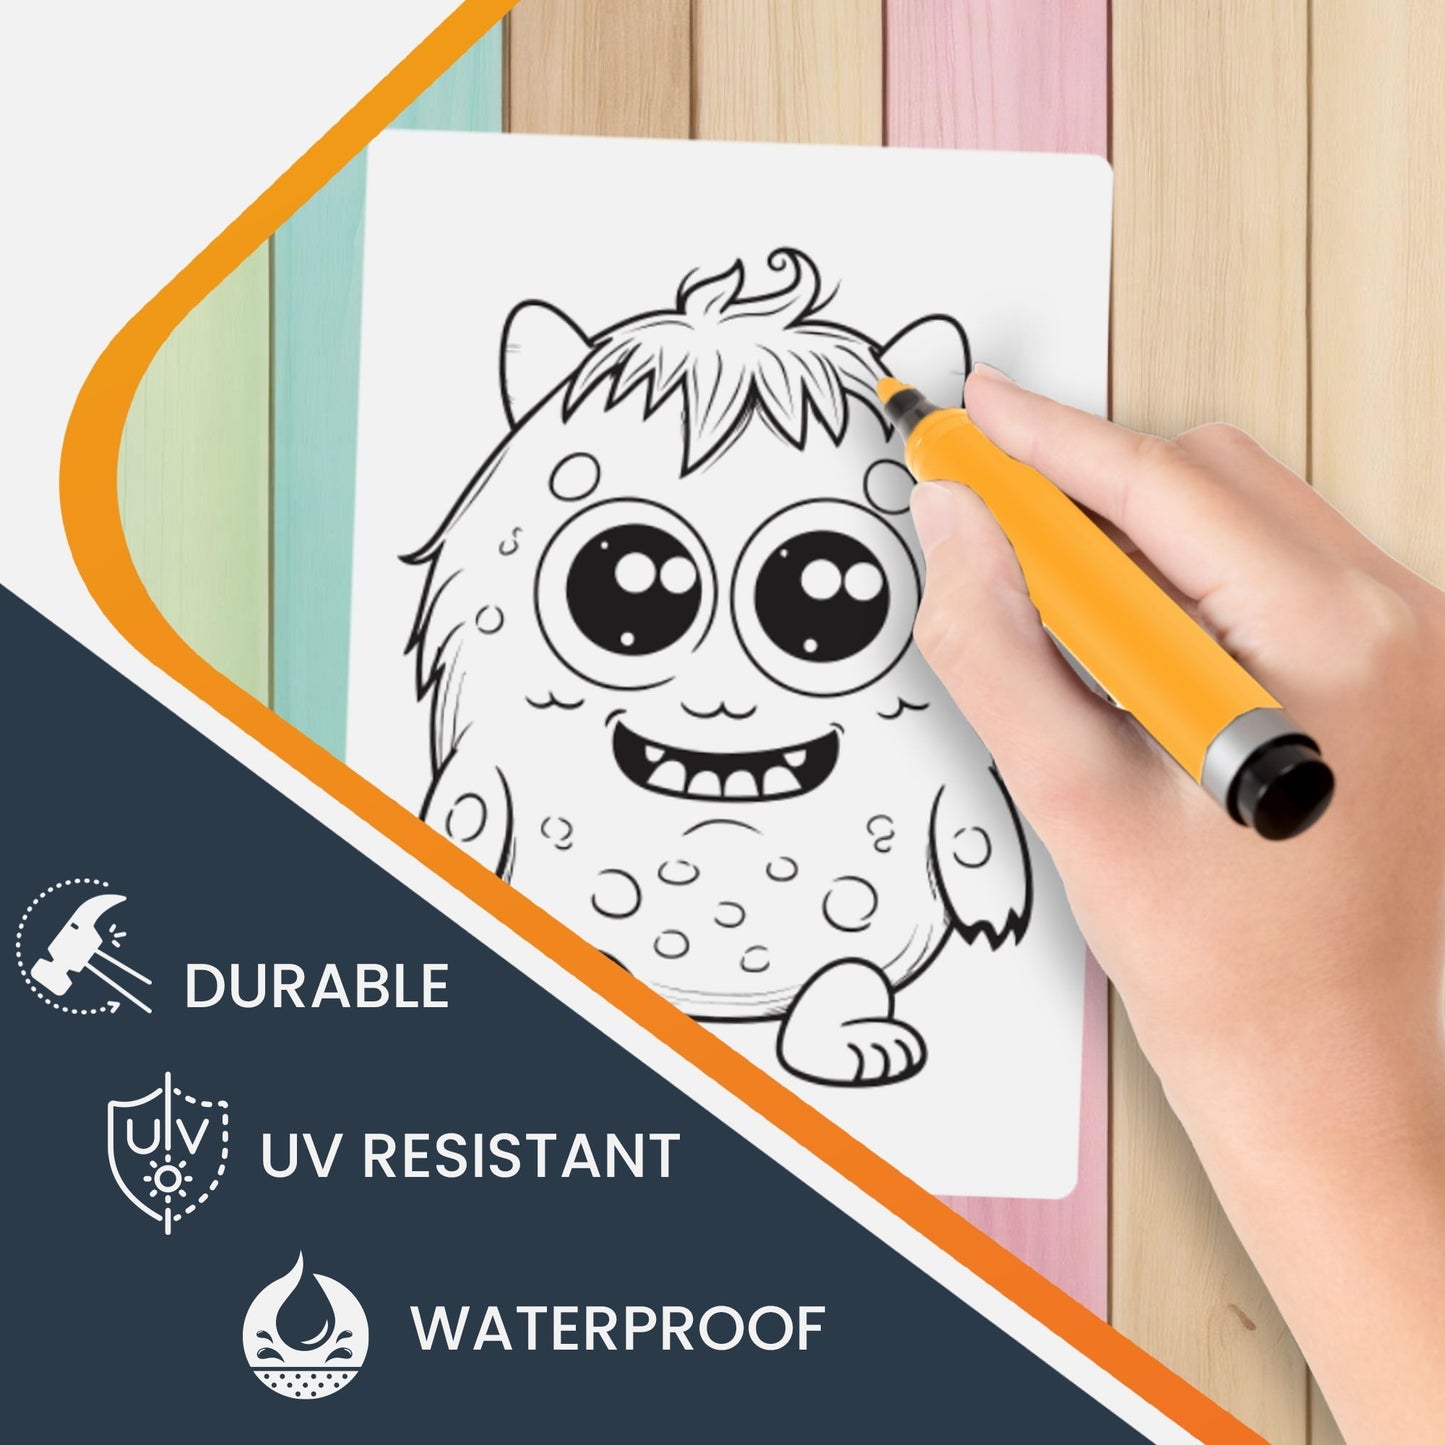 Magnet Me Up Color Your Own Cute Monster DIY Coloring Magnet Decal, 5x7 Inch, Perfect Creative Artistic Gift Idea and Refrigerator Decoration, Kids Expression Craft and Activity, Crafted in The USA